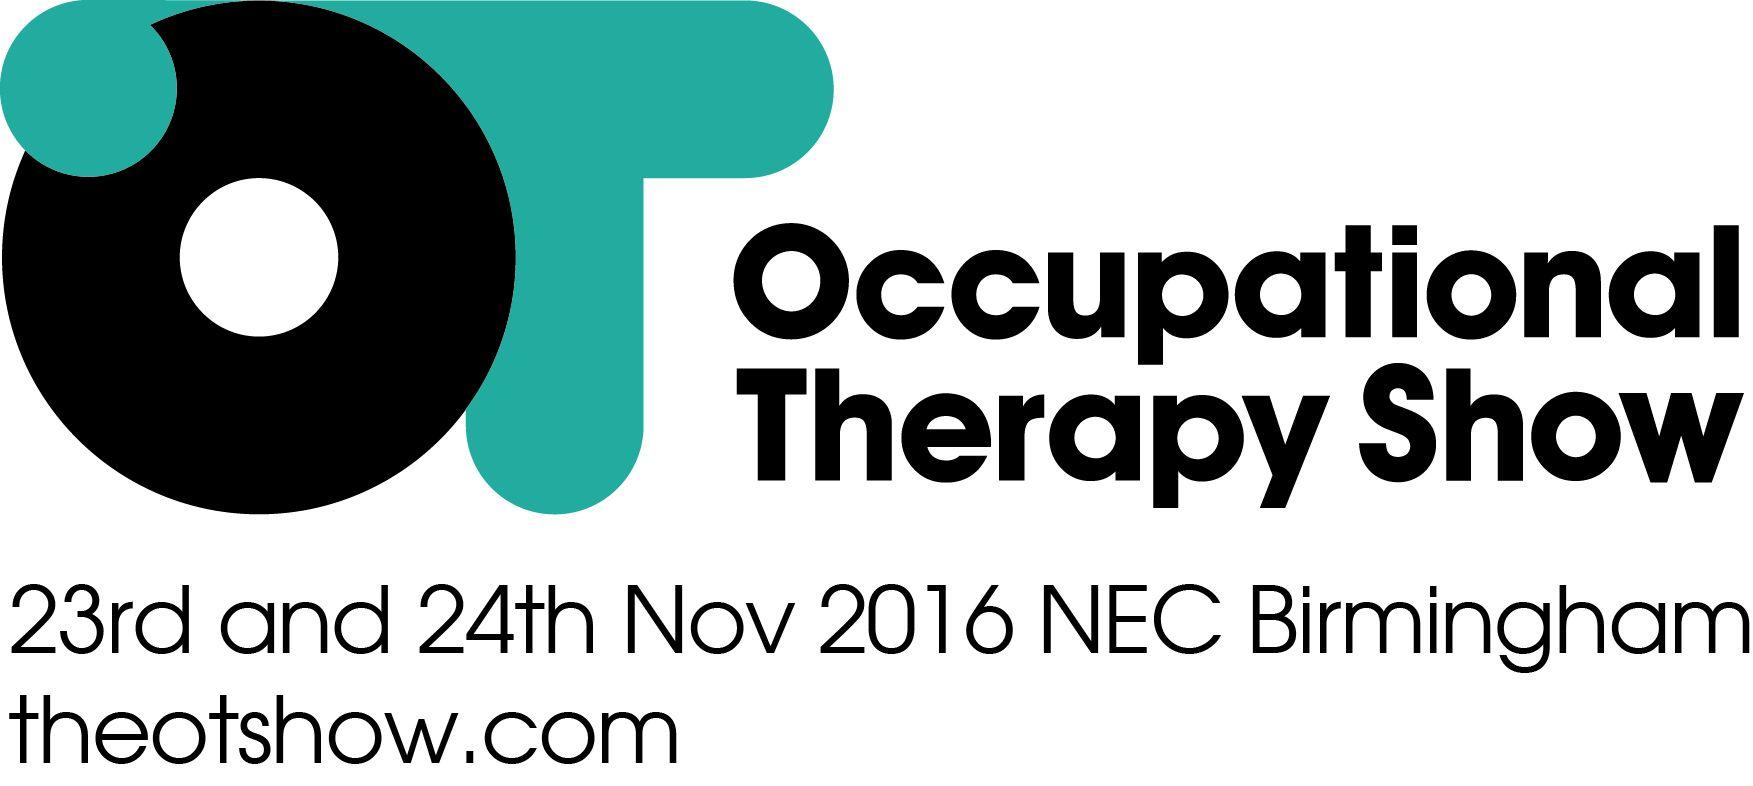 Occupational Therapy Logo - There so much for YOU at The Occupational Therapy Show!